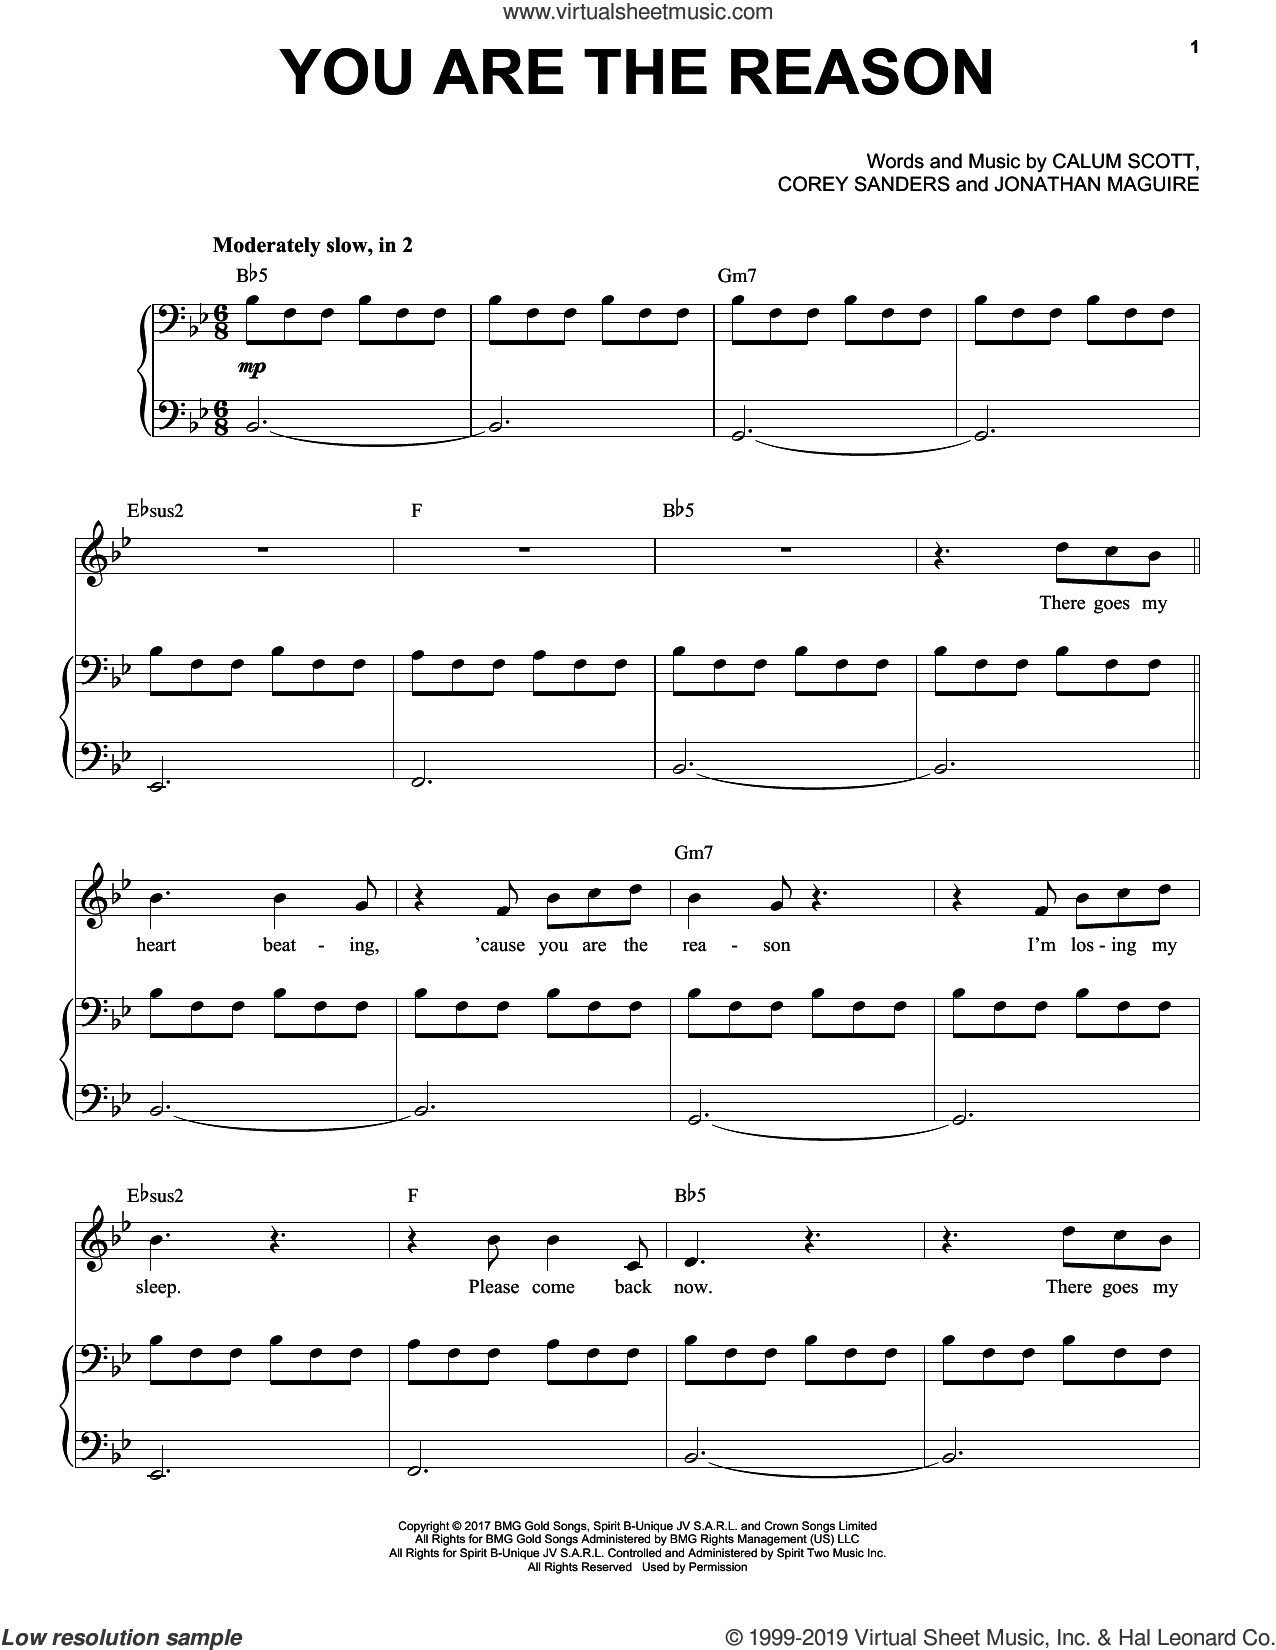 Scott - You Are The Reason sheet music for voice and piano (PDF)